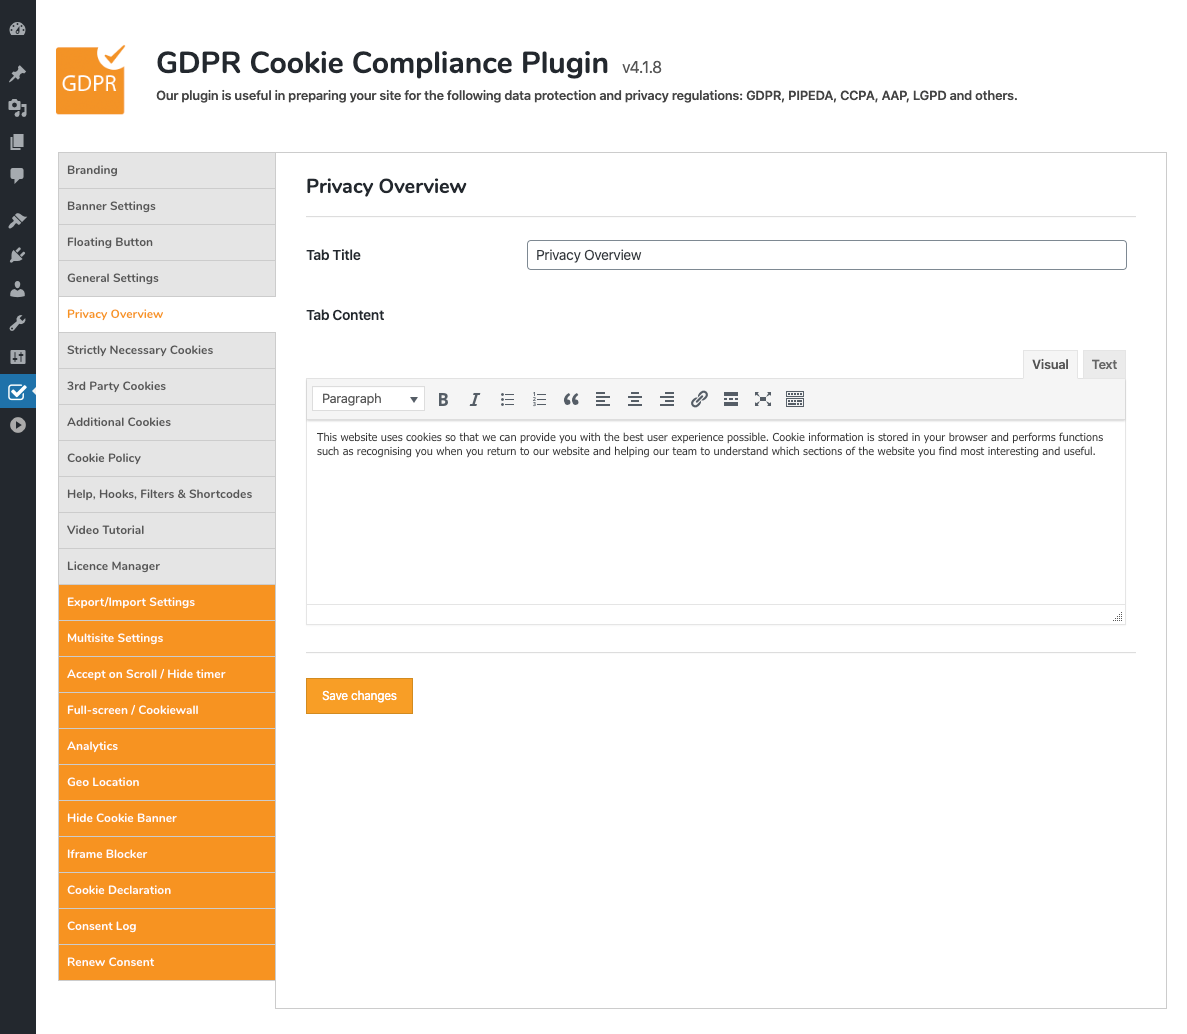 GDPR Cookie Compliance - Front-end - Full-Screen Mode - Cookie Settings [Premium]